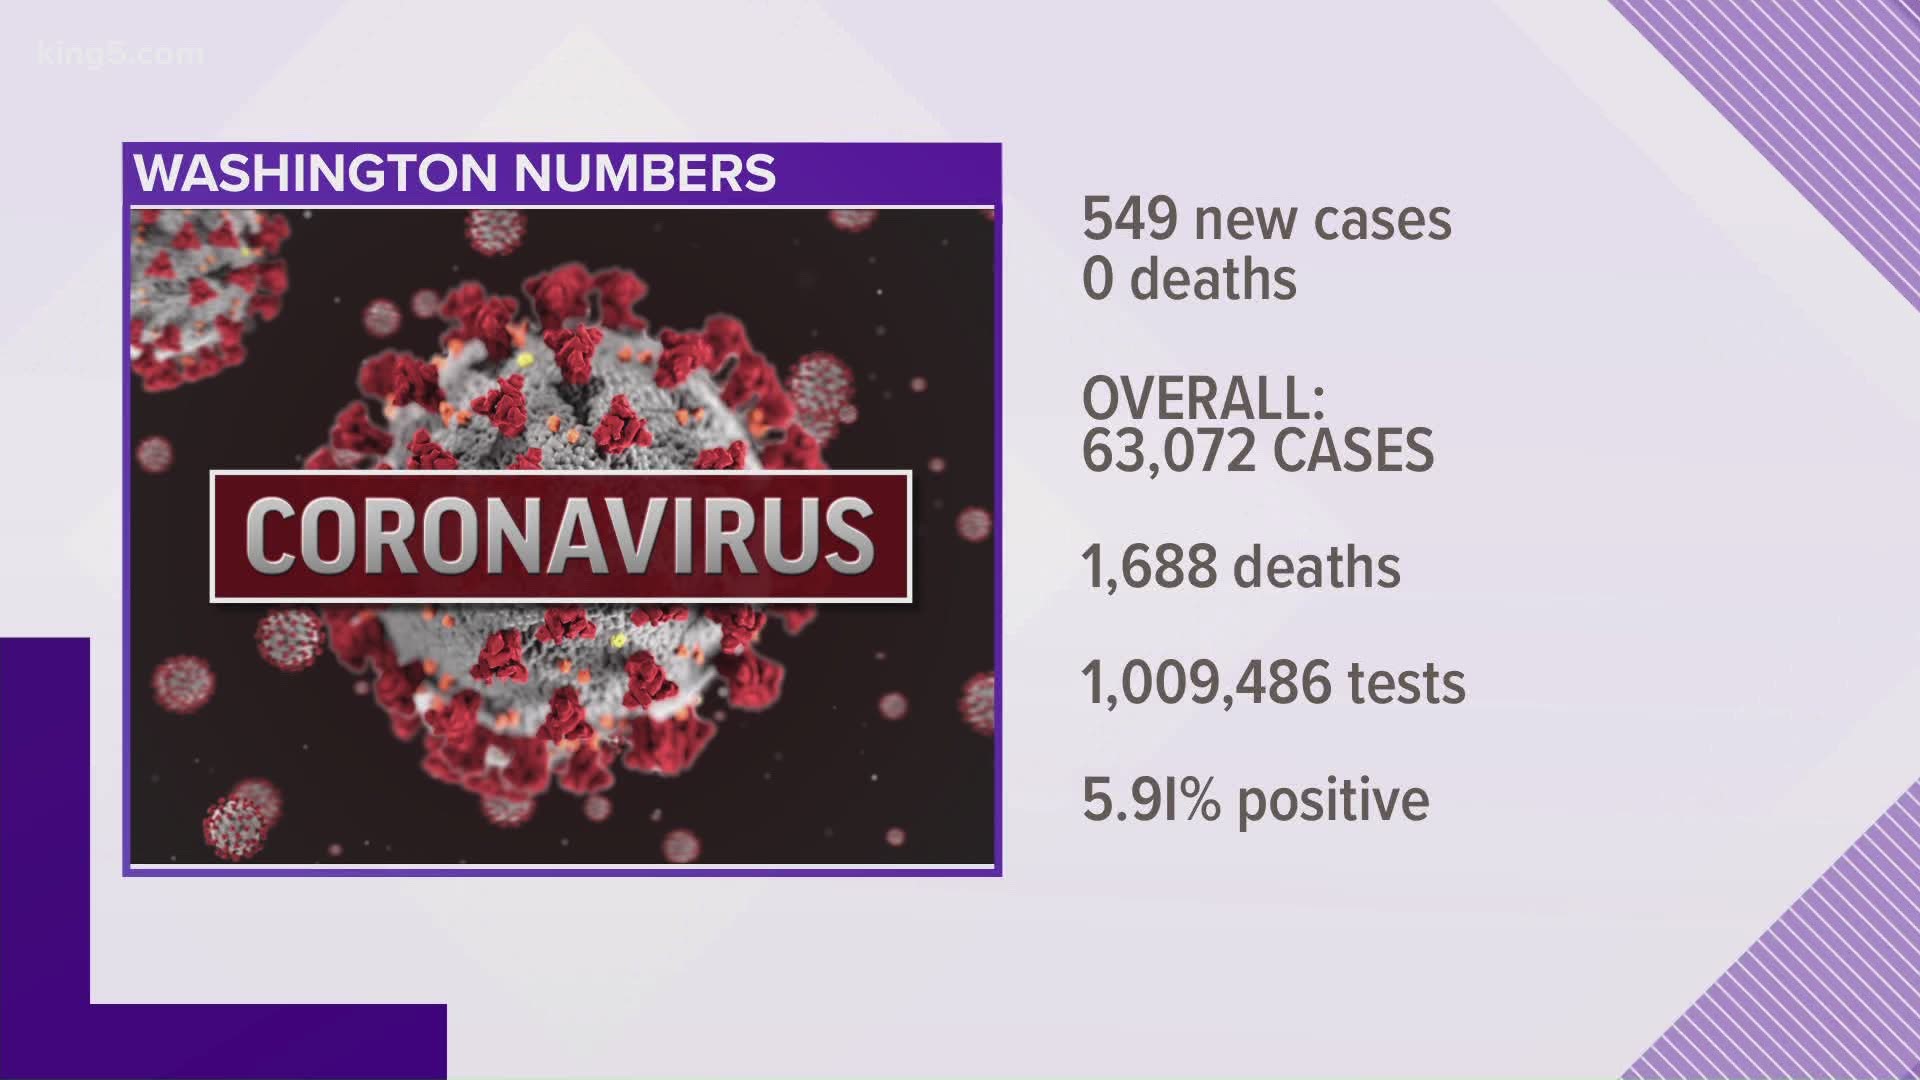 Continuing coverage of the coronavirus pandemic and its impact on Washington state and nation.